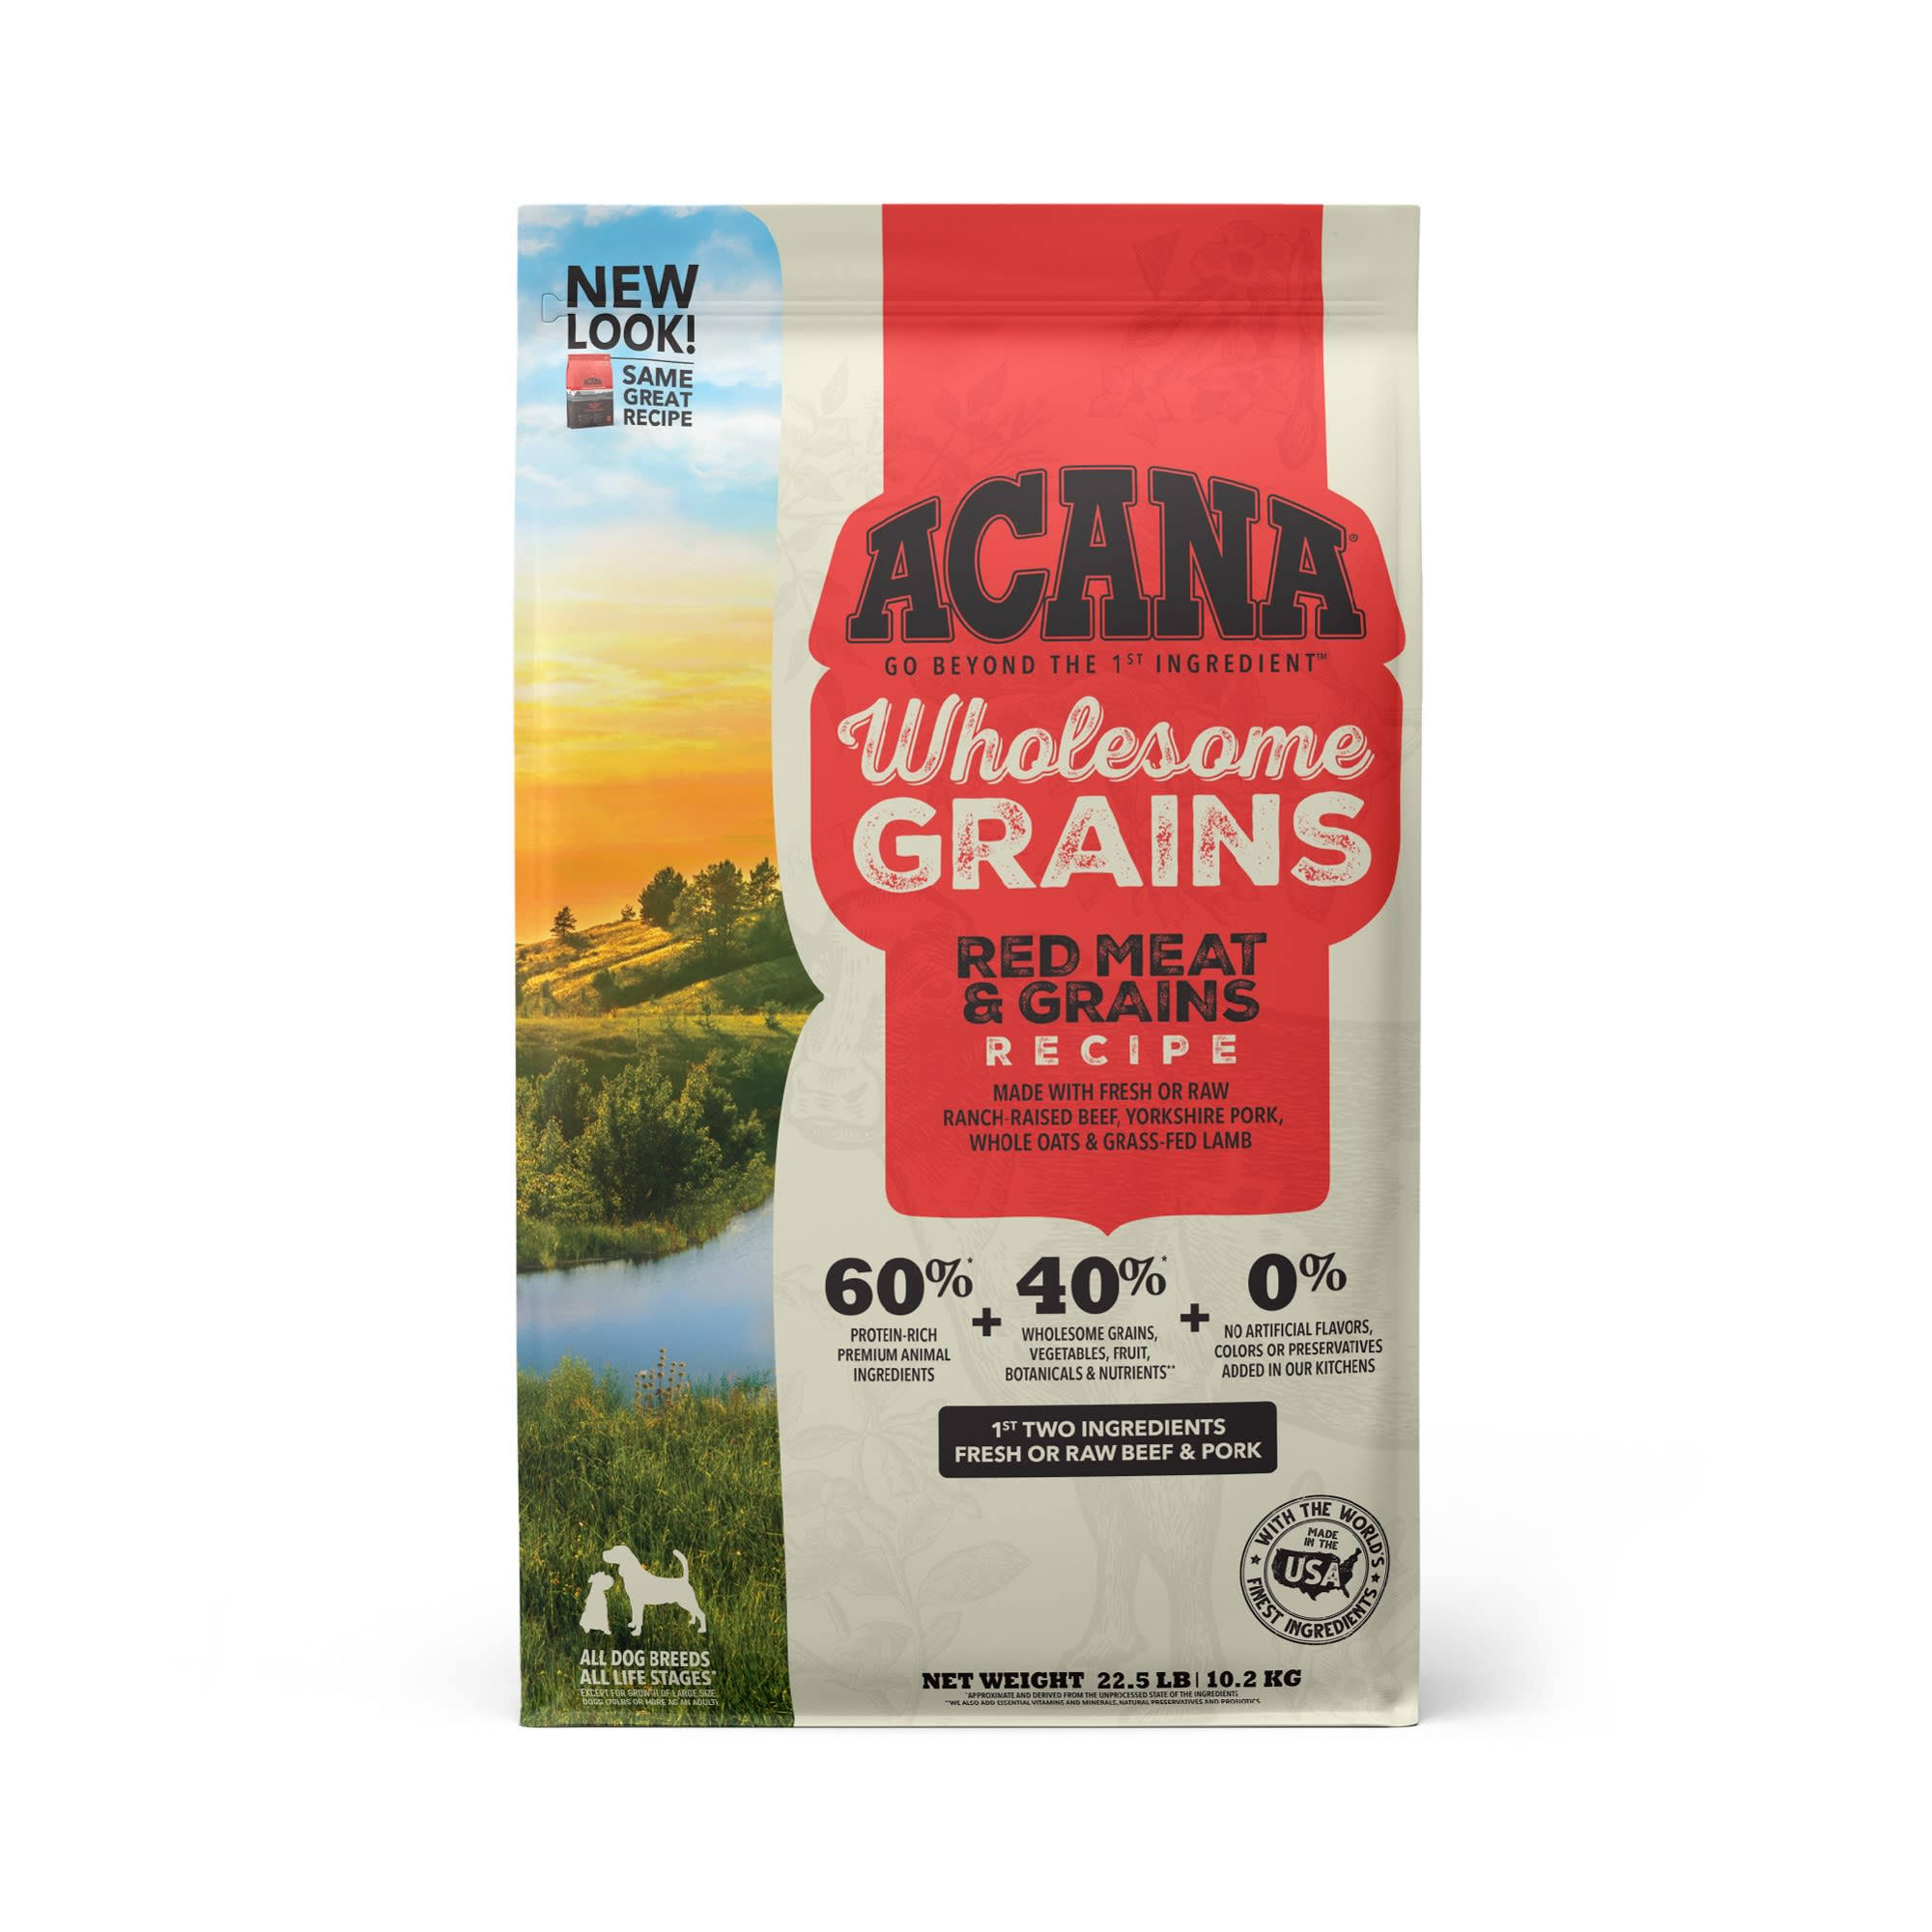 Acana Wholesome Grains Red Meat & Grains Recipe Dry Dog Food 22.5 LB